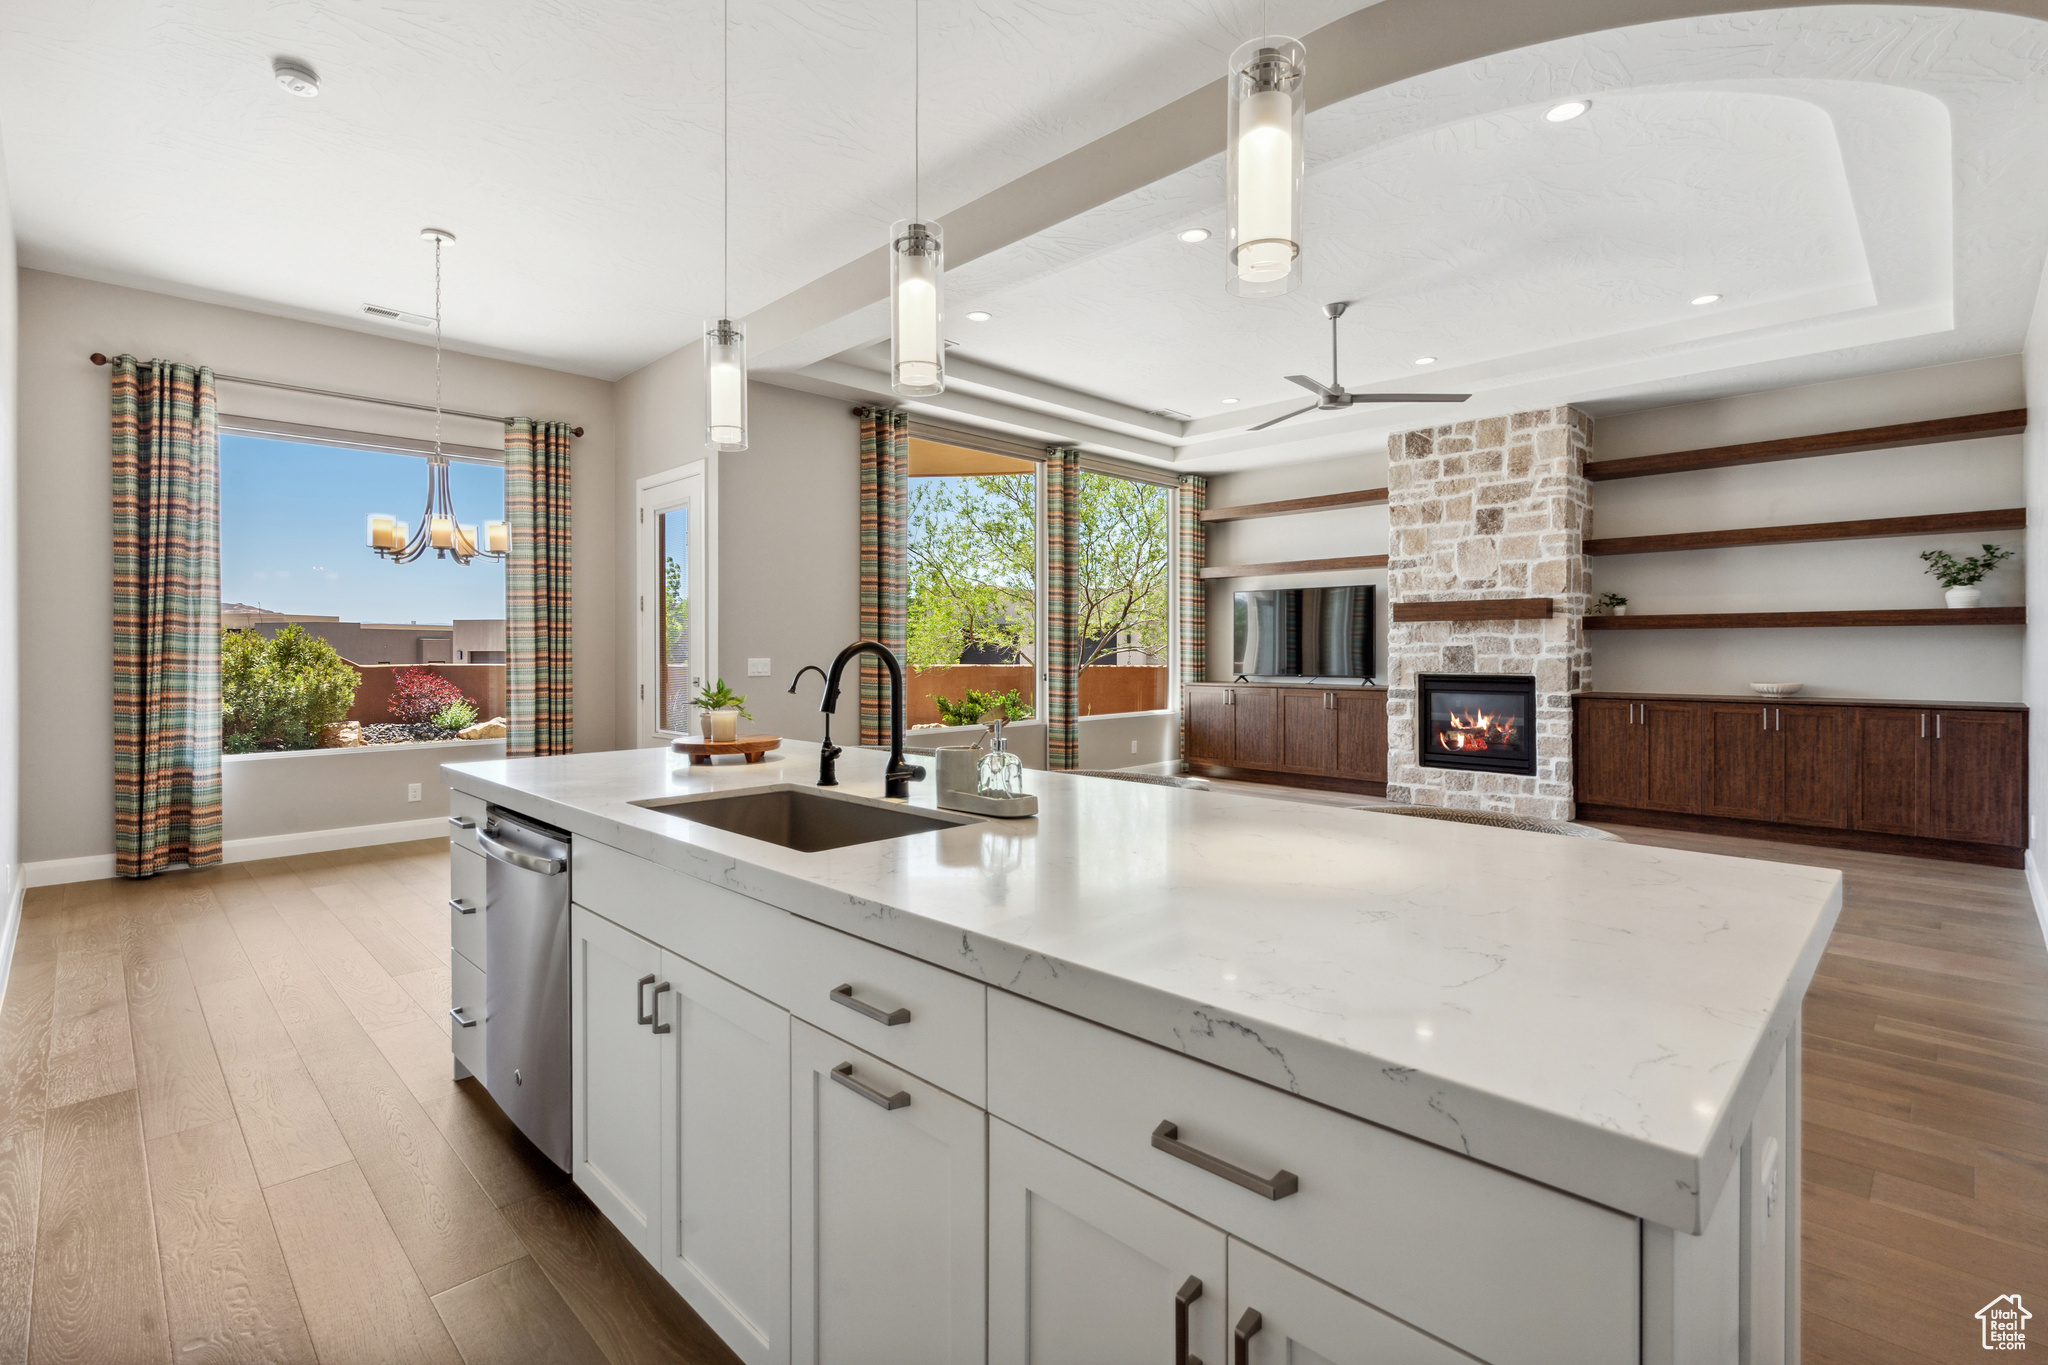 Kitchen featuring stainless steel dishwasher, sink, a center island with sink, and a stone fireplace